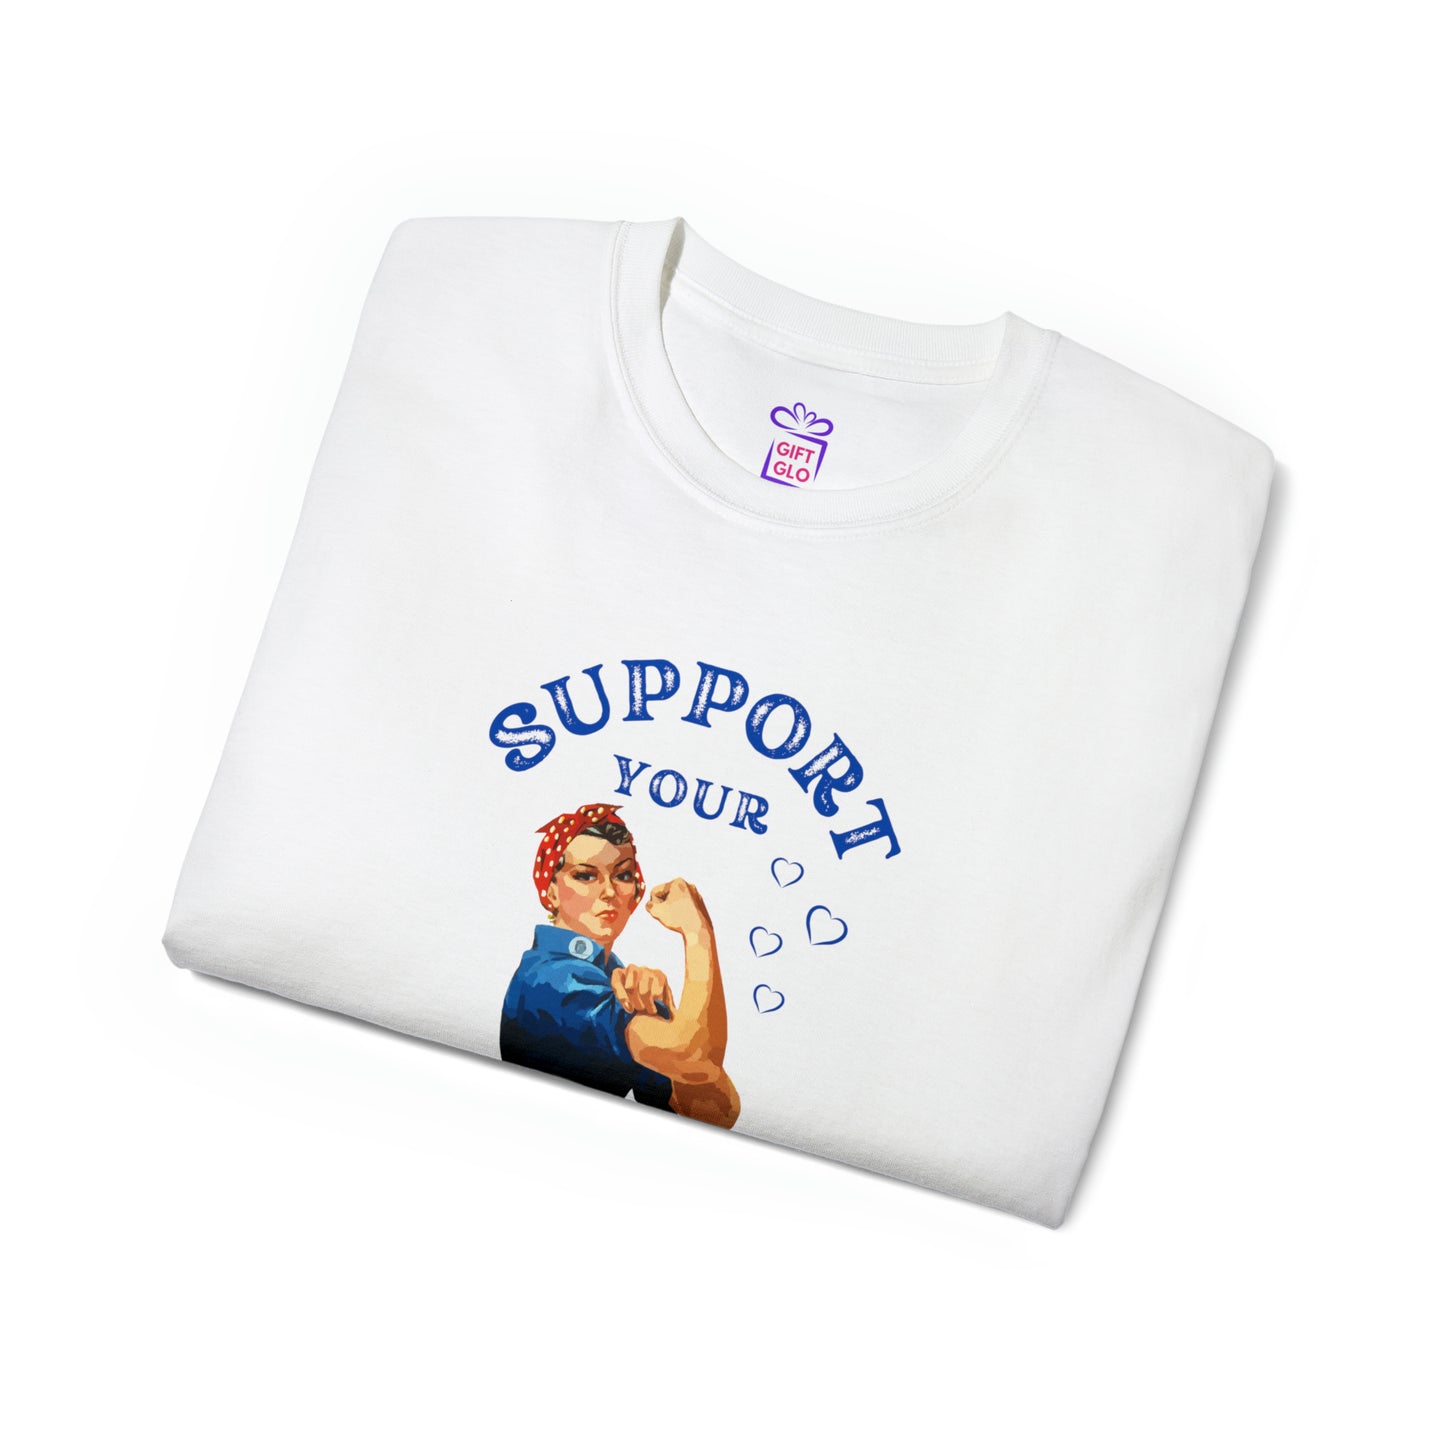 Rosie Recovery Women's T-Shirt - 'Support Your Sober Girl Gang' - Unisex Ultra Cotton Tee